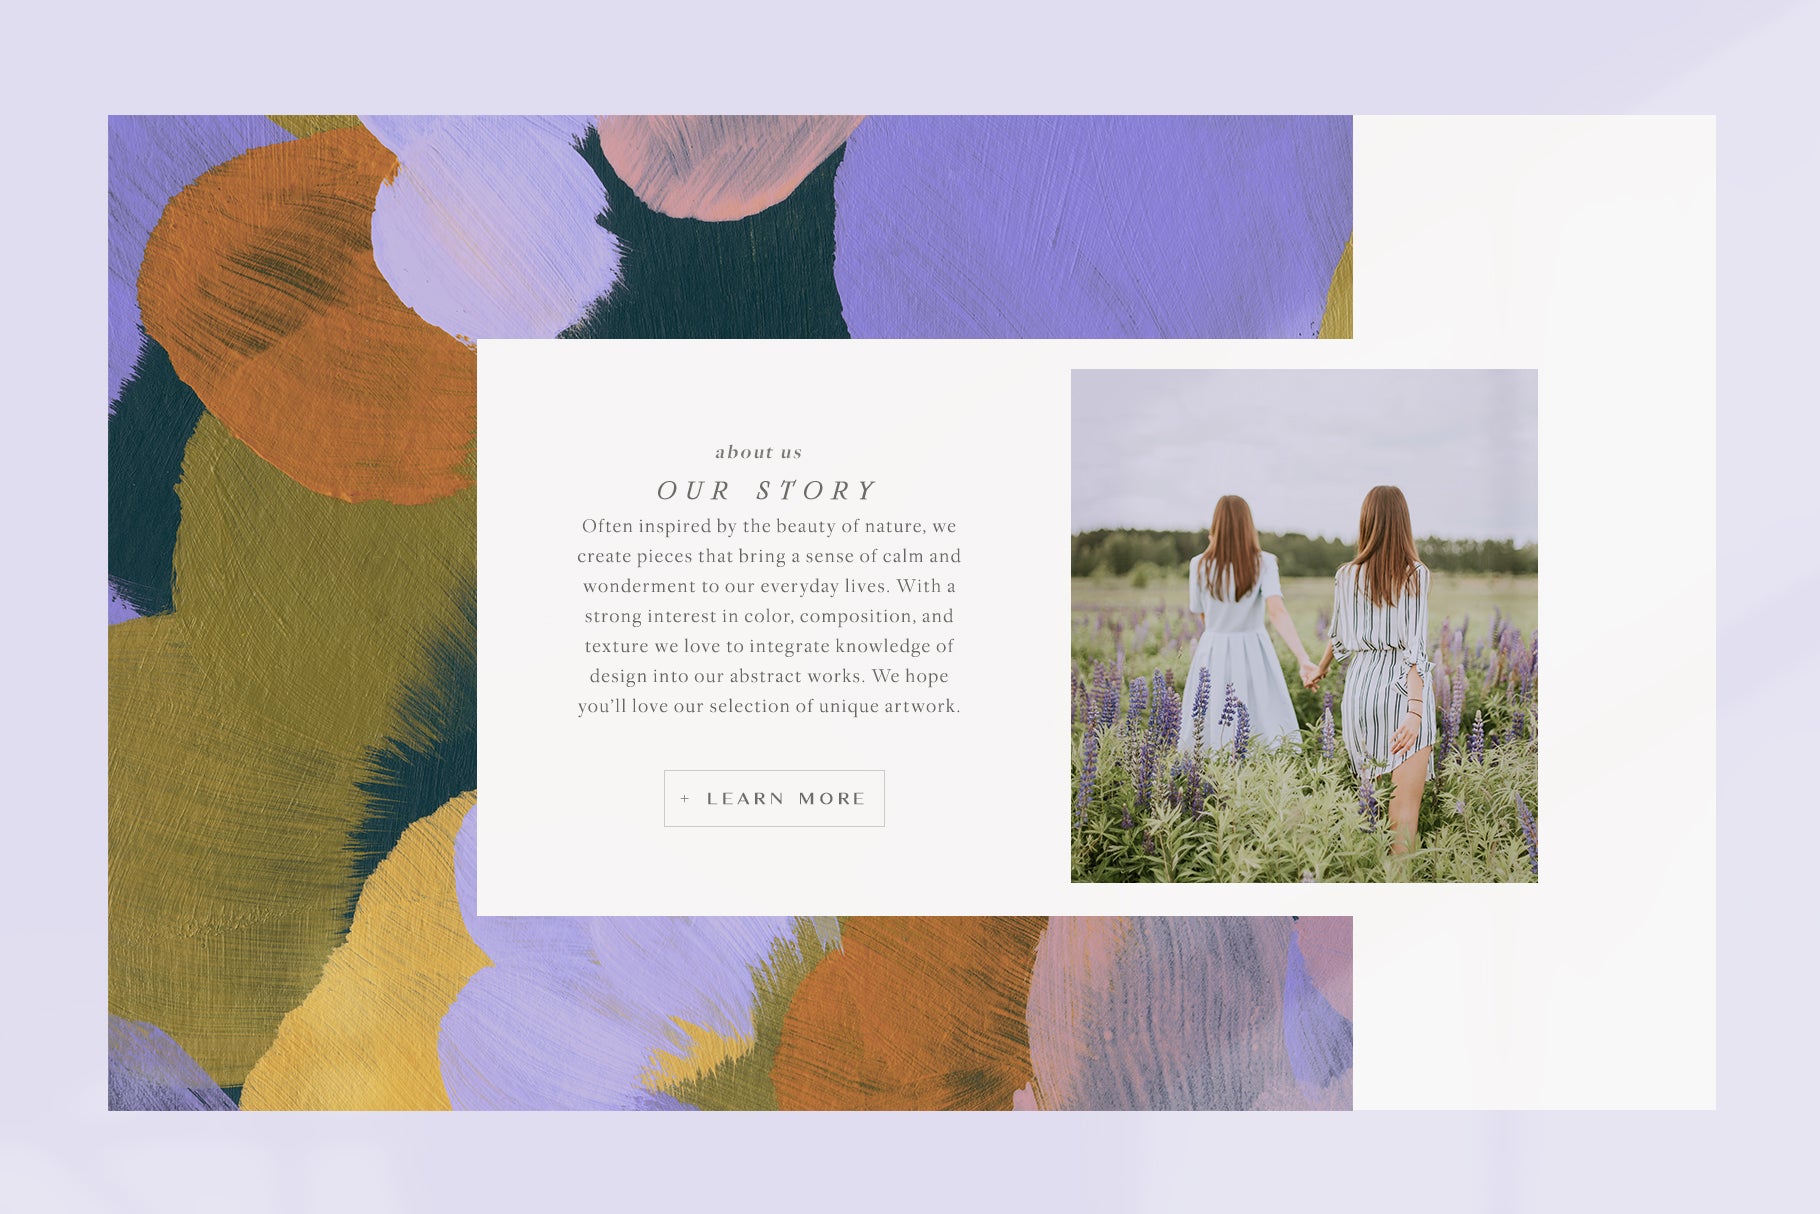 painted artistic backgrounds for web design